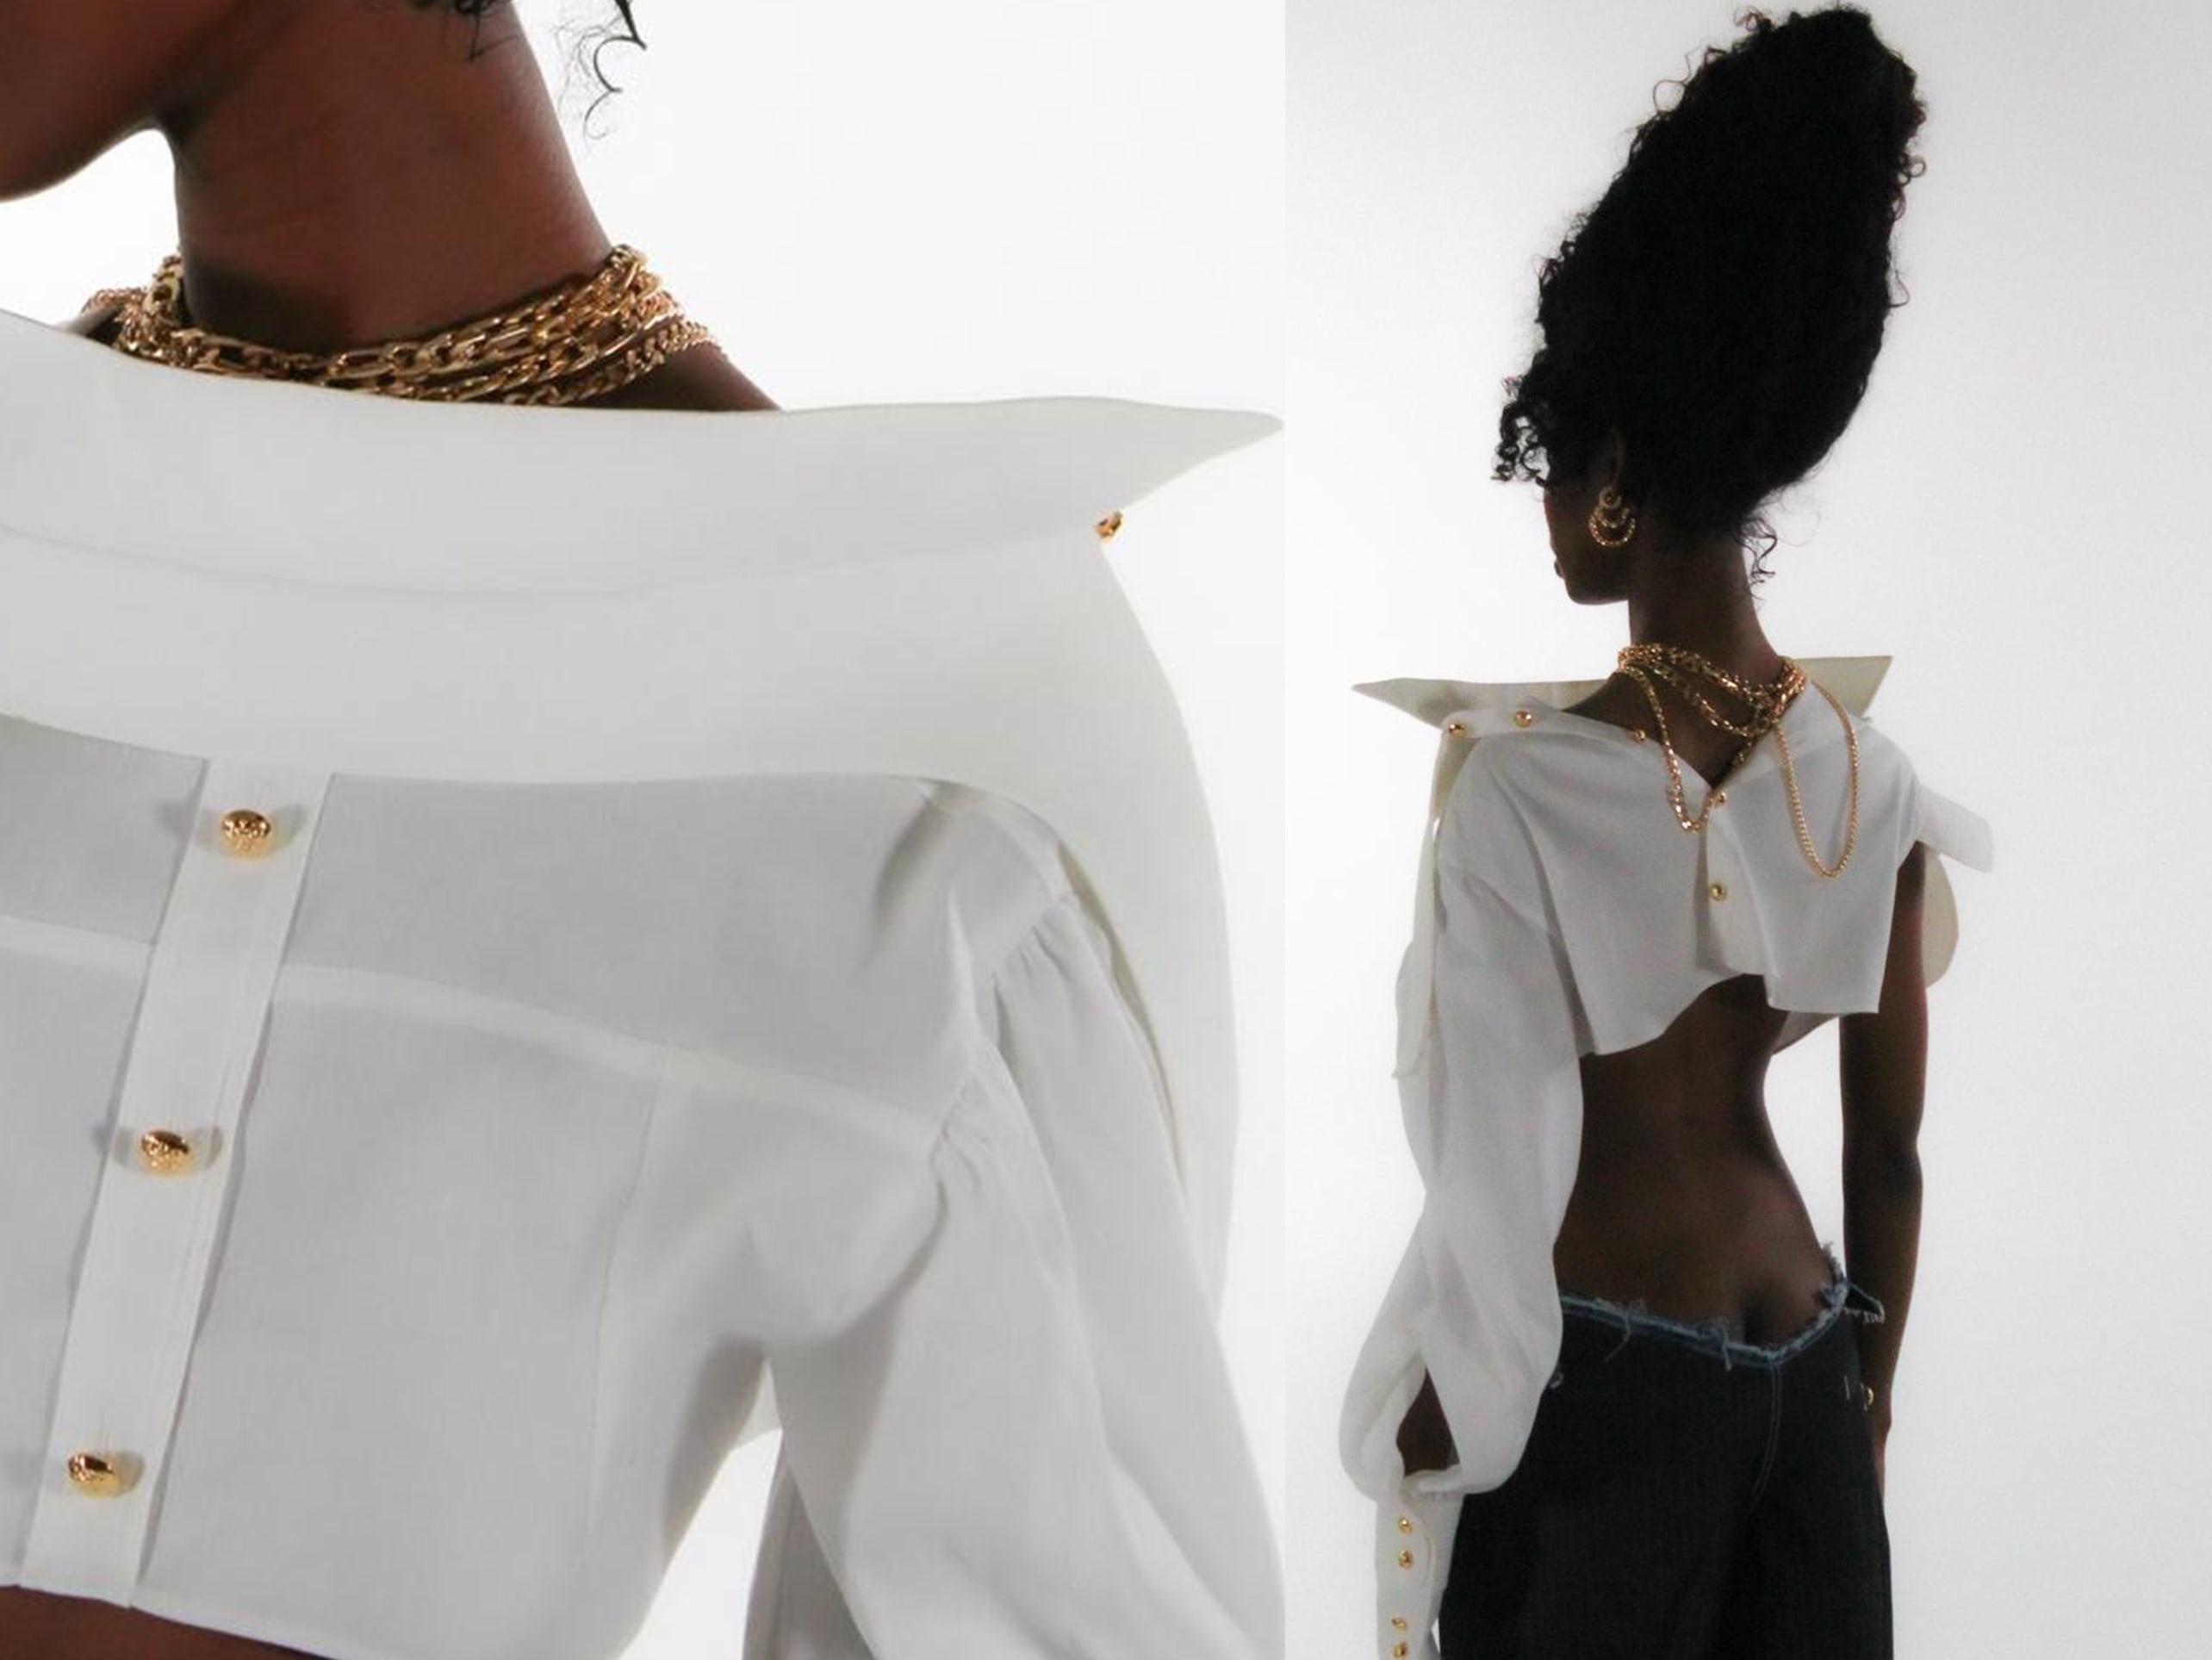 Black female wearing white shirt and gold chain.